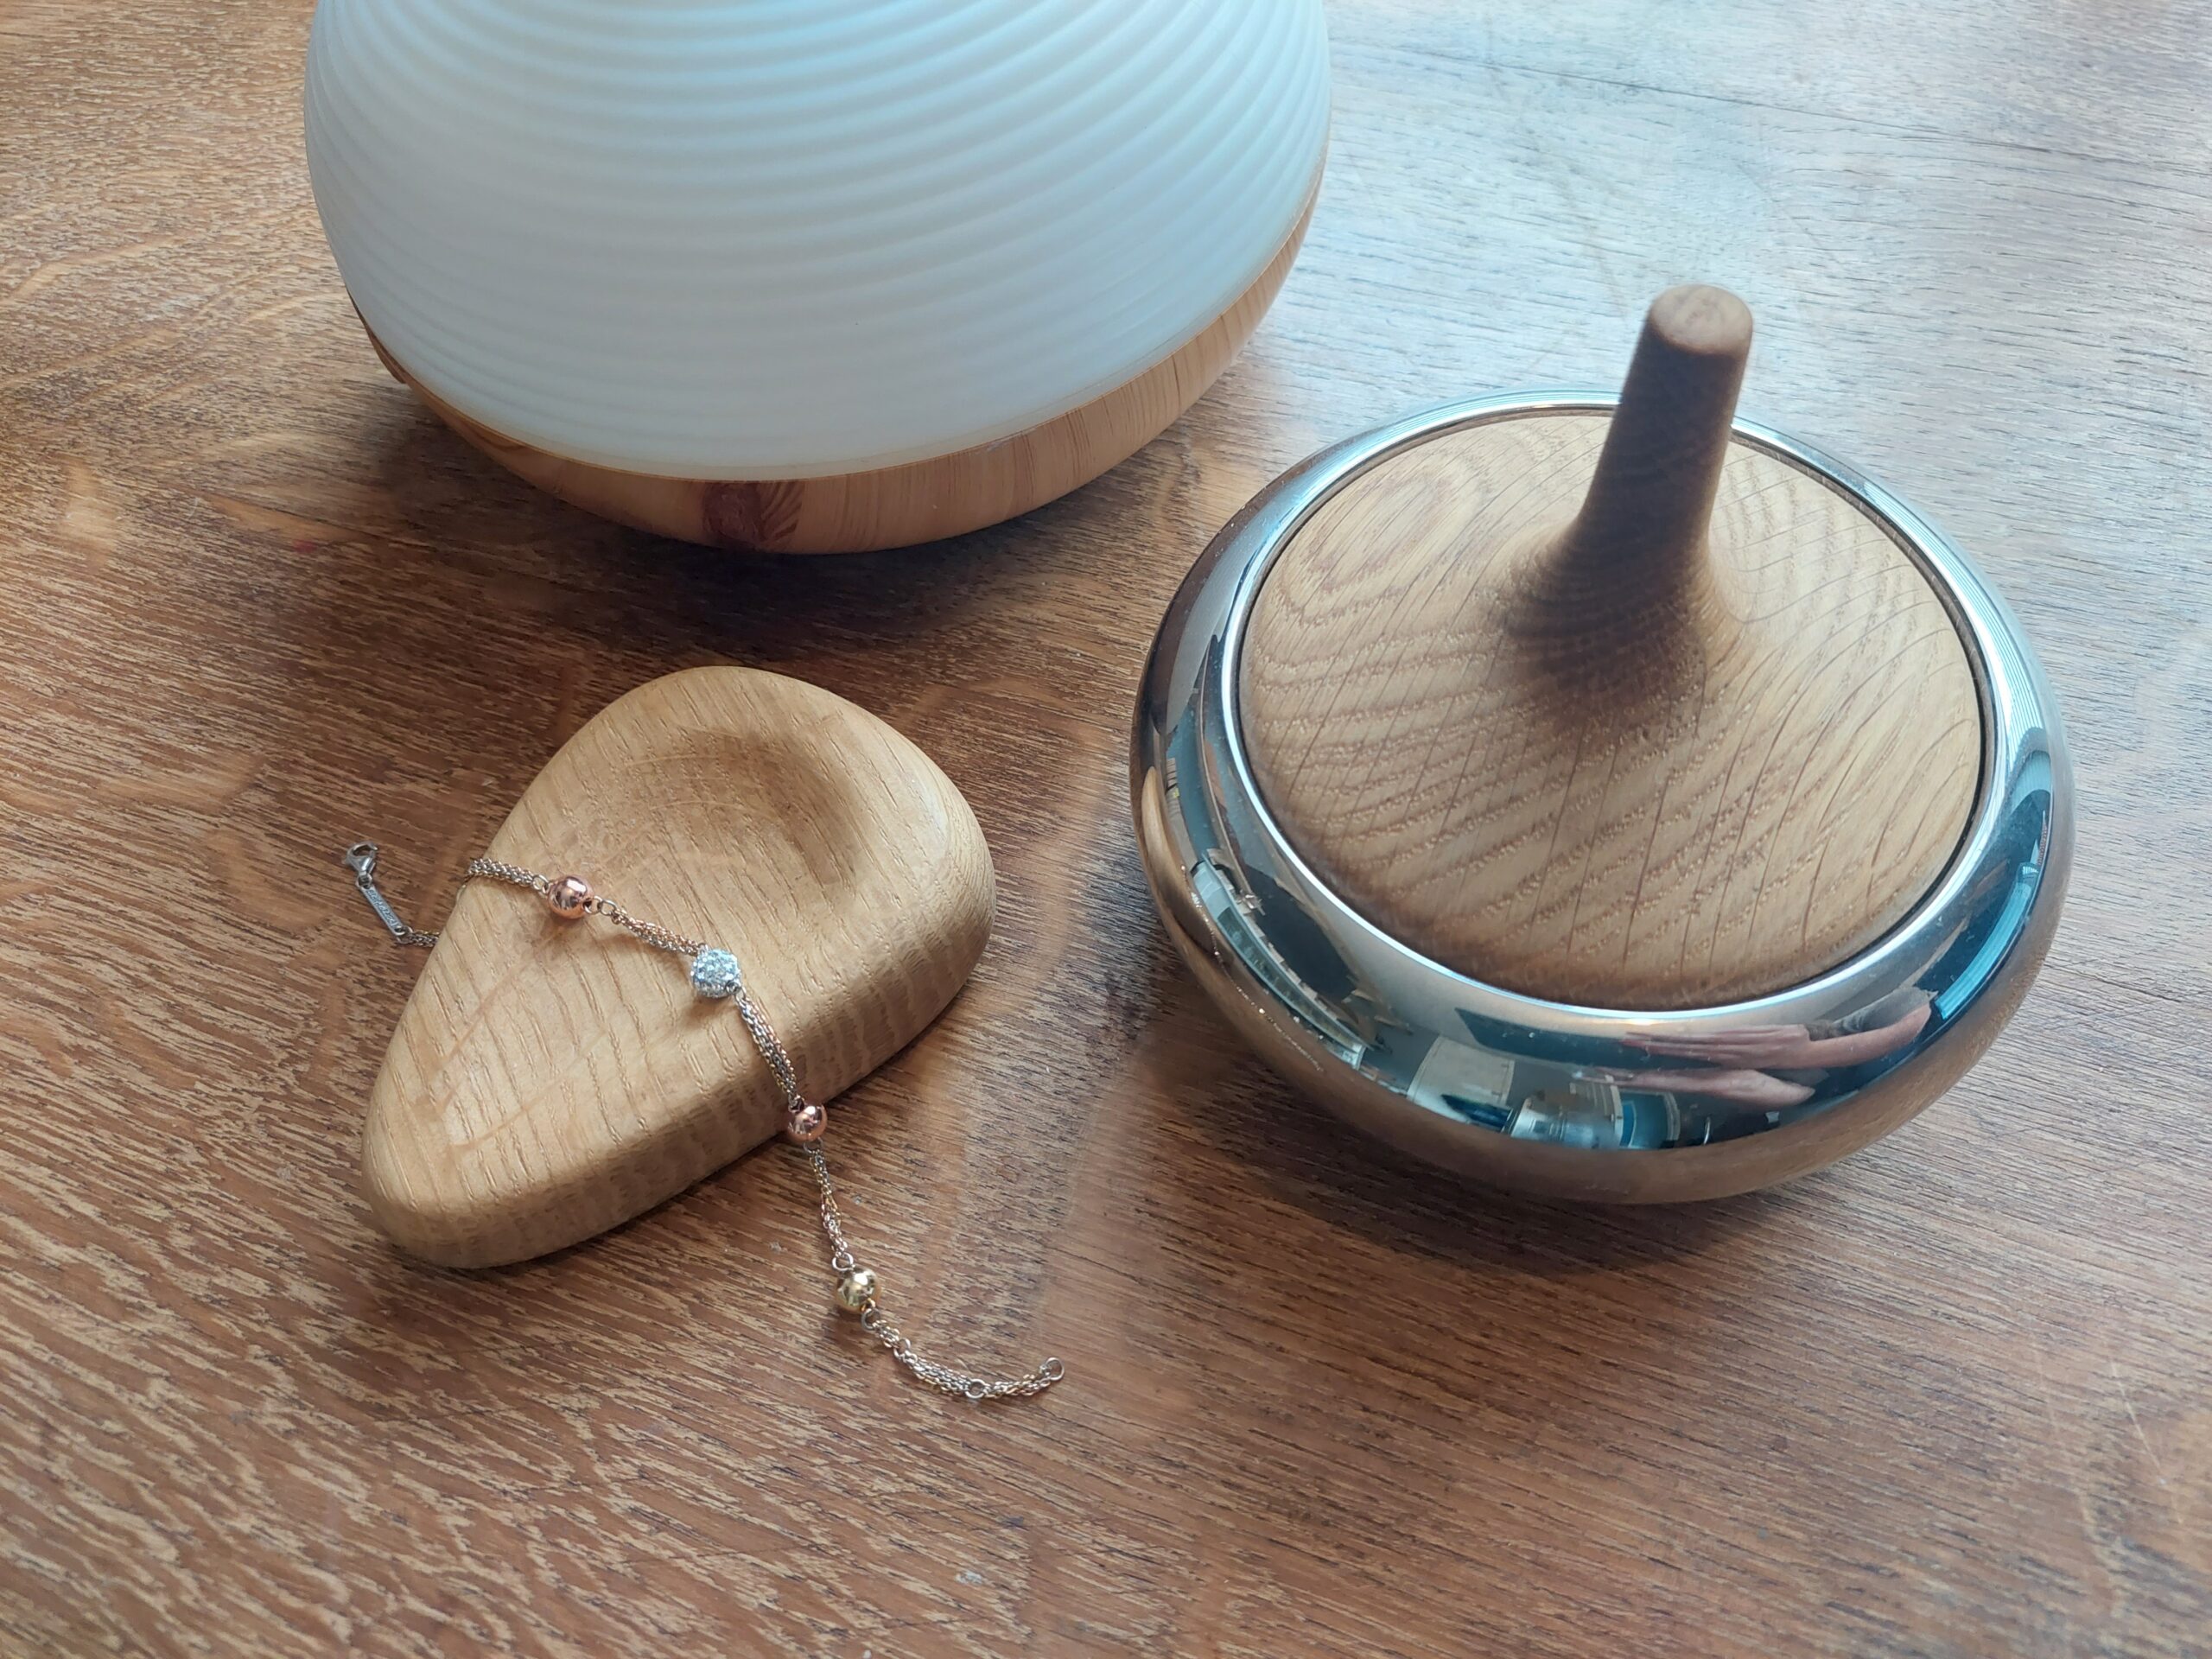 Trinket pod gift made by The Wooden Gem - unusual wooden gifts ideas